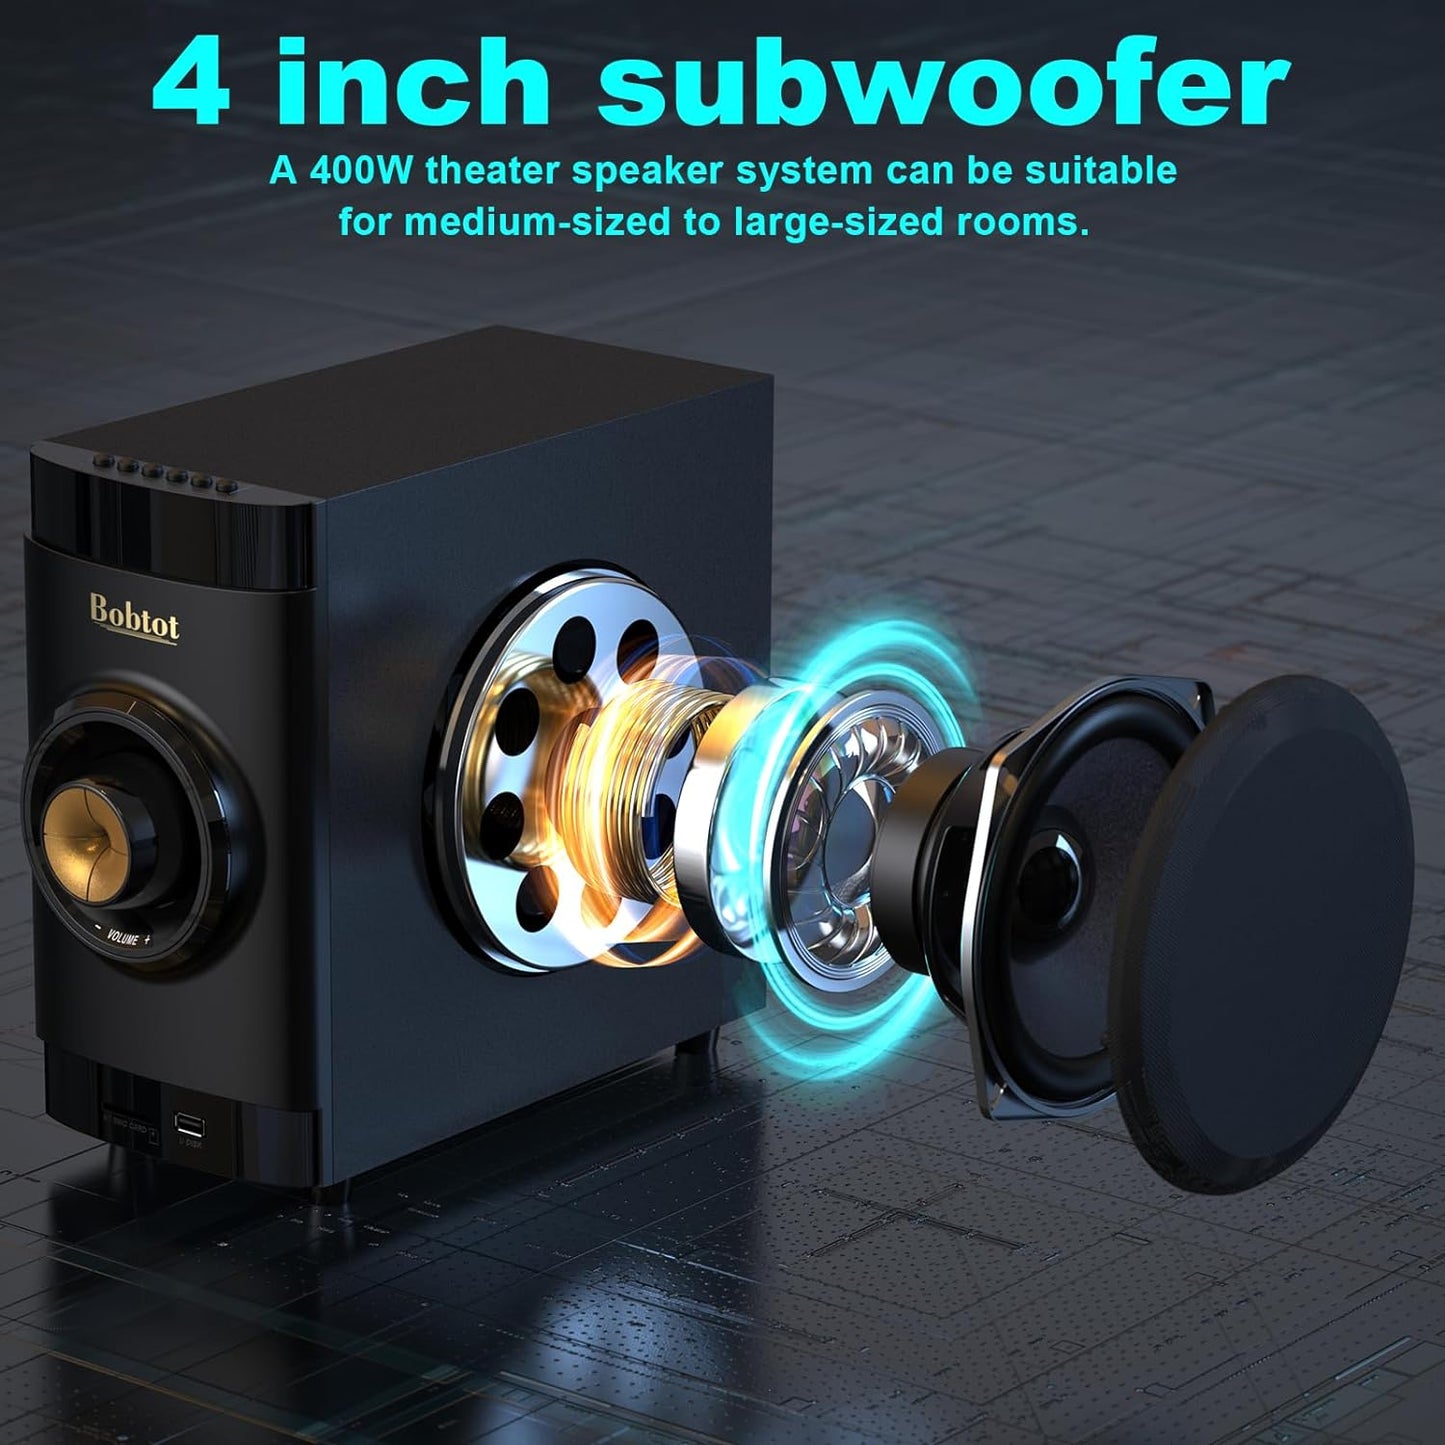 Surround Sound Systems 5.1 Home Theater System Speakers for TV Subwoofer with HDMI ARC Optical Bluetooth Input Stereo Home Audio Wired Speakers System for 4K TV Ultra HD AV DVD FM Radio USB